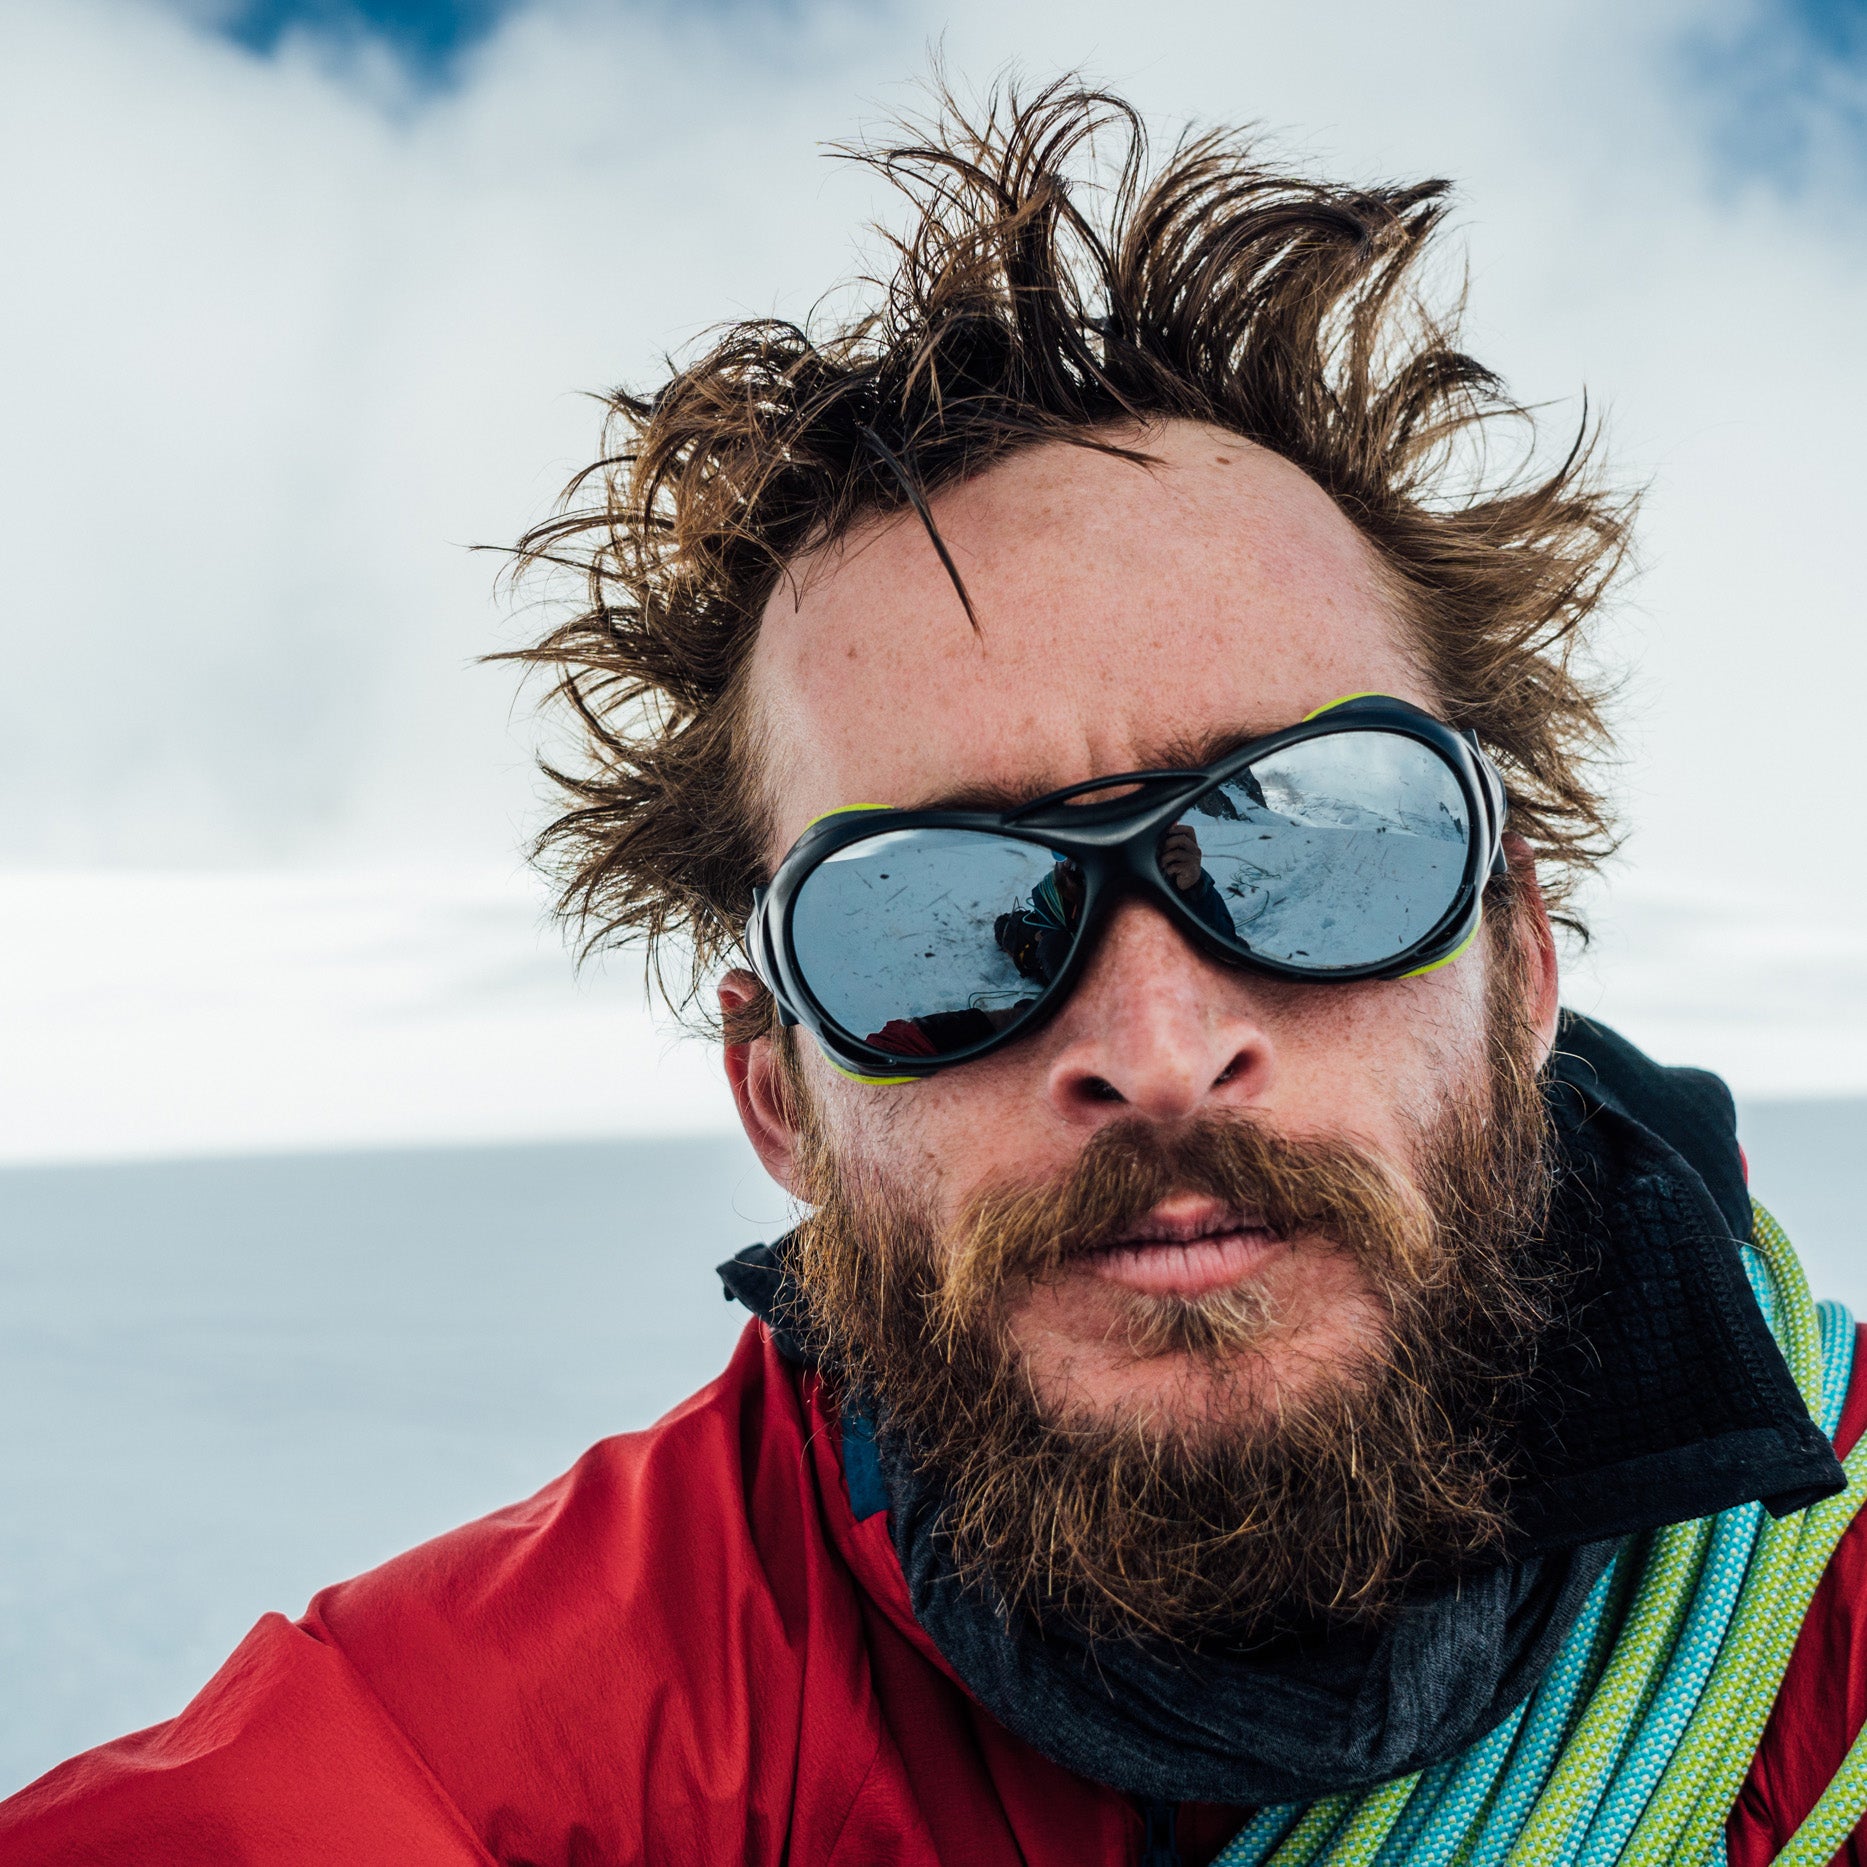 The Best Sunglasses for Arctic Expeditions